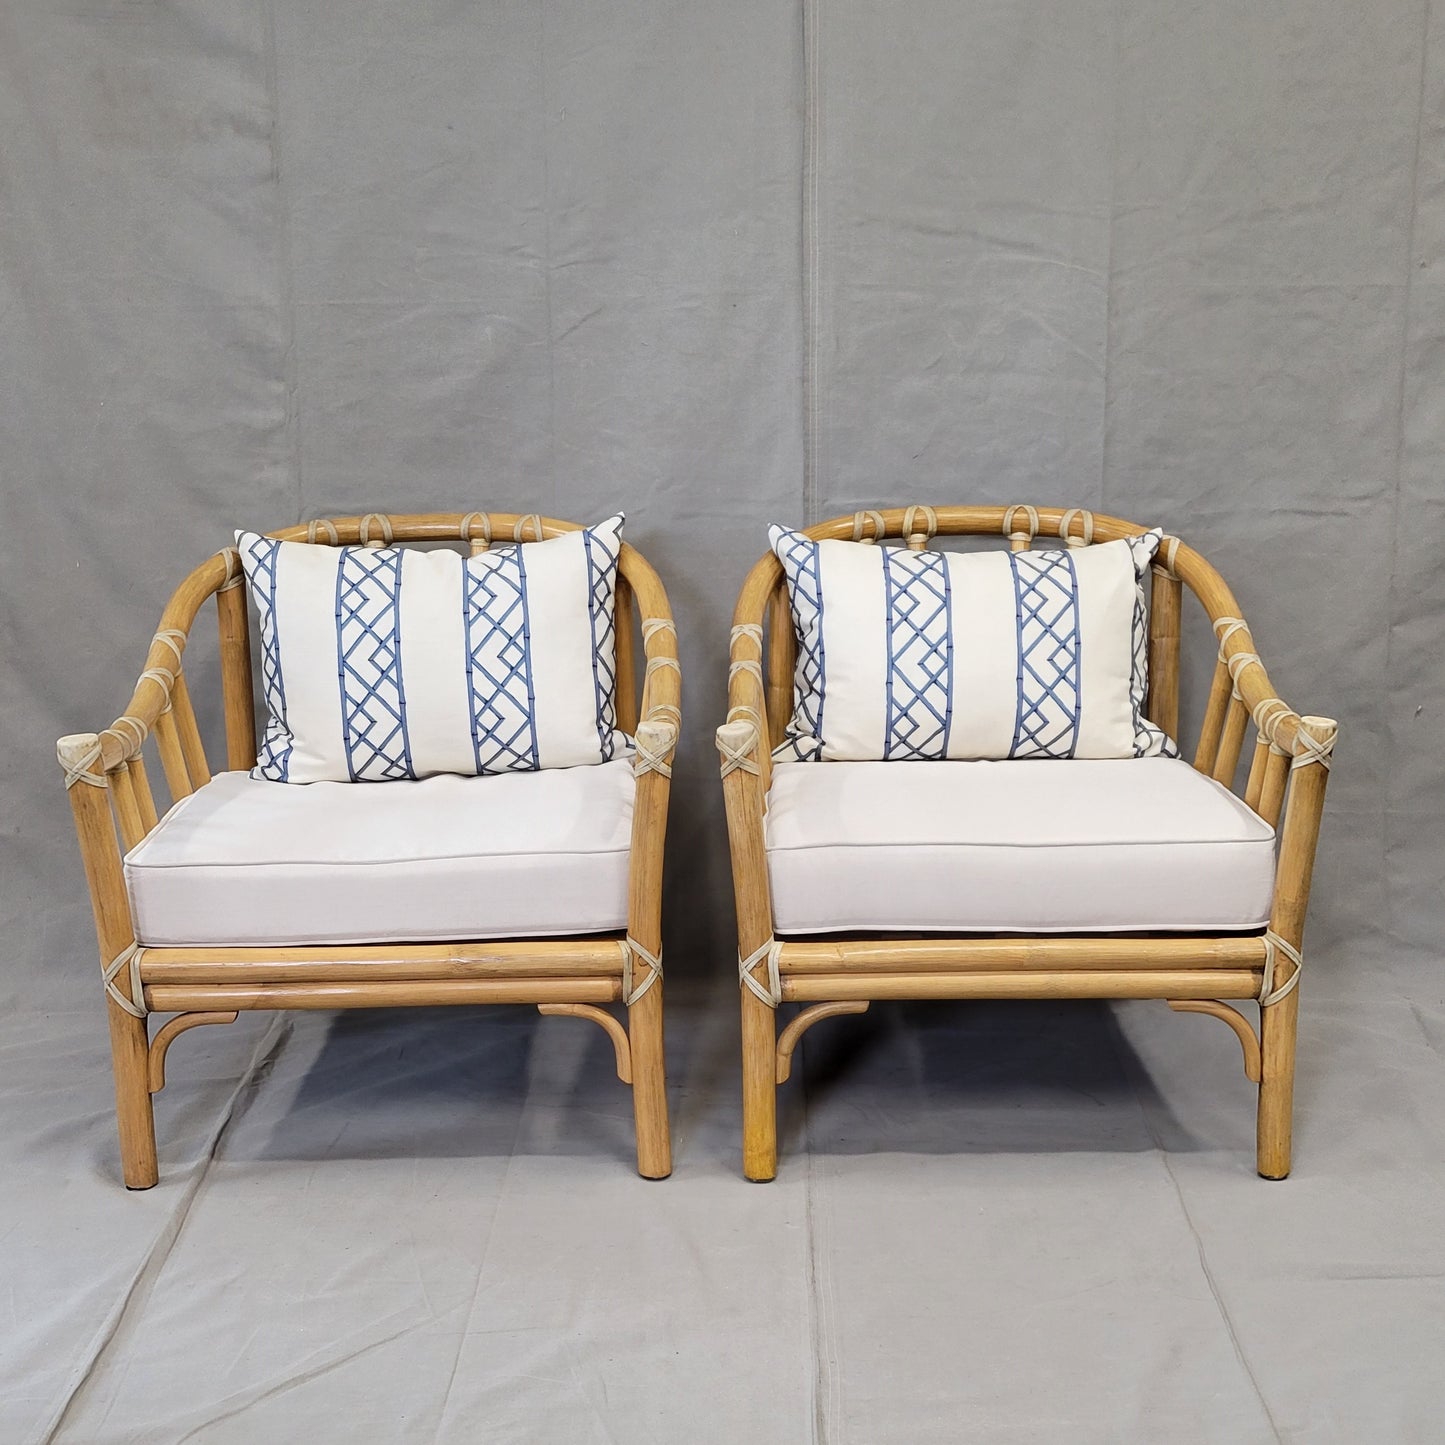 Vintage 1978 McGuire Bamboo Lounge Chairs With Rawhide Binding (Two Sets of Cushions) - a Pair